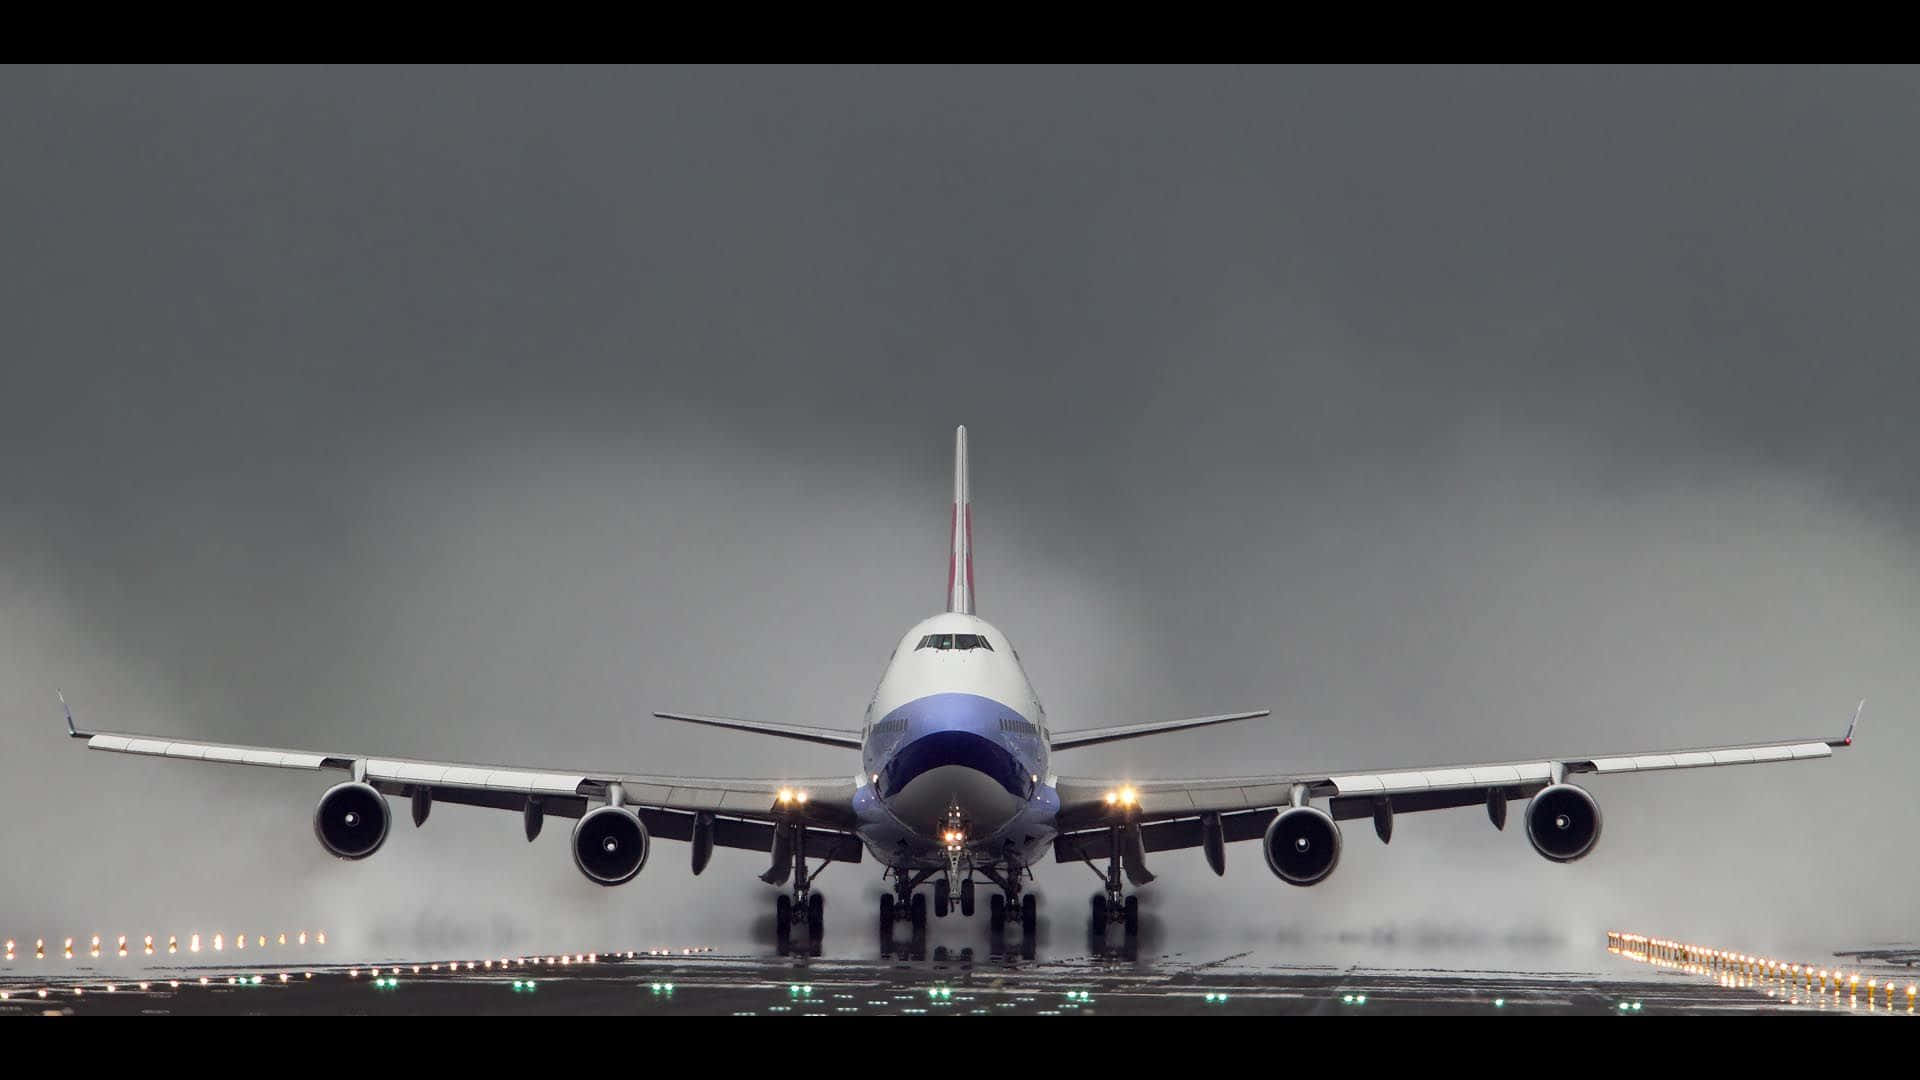 747 Airplane Taking Off